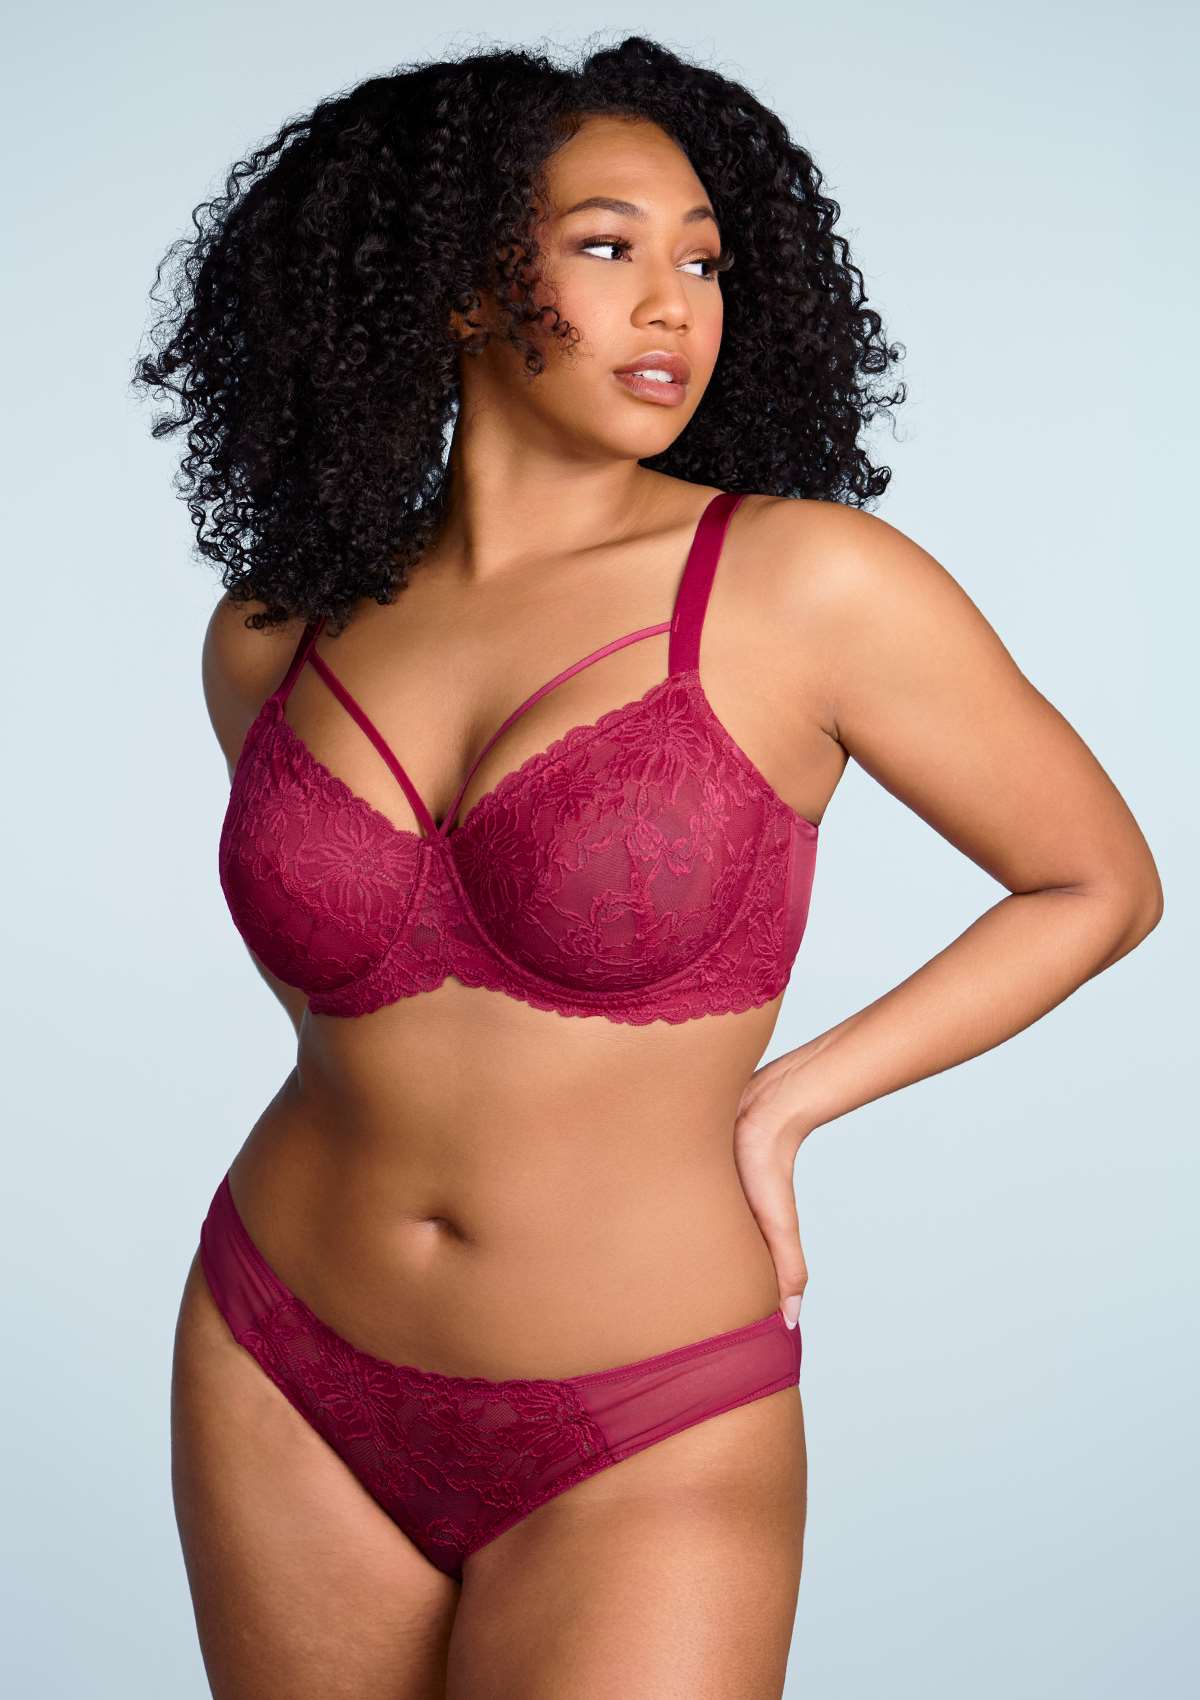 HSIA Pretty In Petals Lace Panties And Bra Set: Plus Size Women Bra - Red / 36 / G